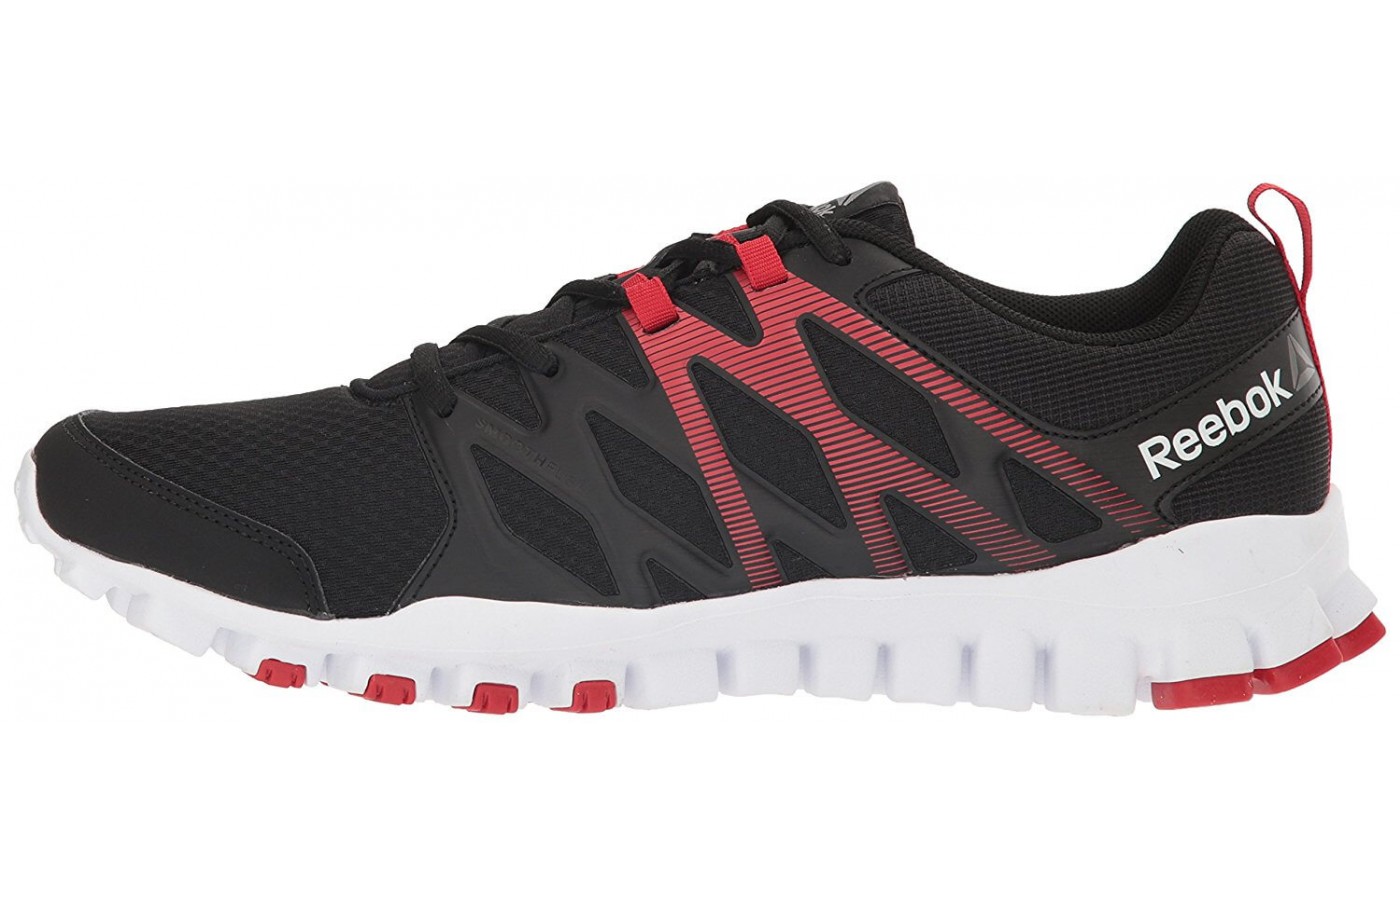 The Reebok RealFlex Train 4.0 features a 3DFuseFrame upper construction